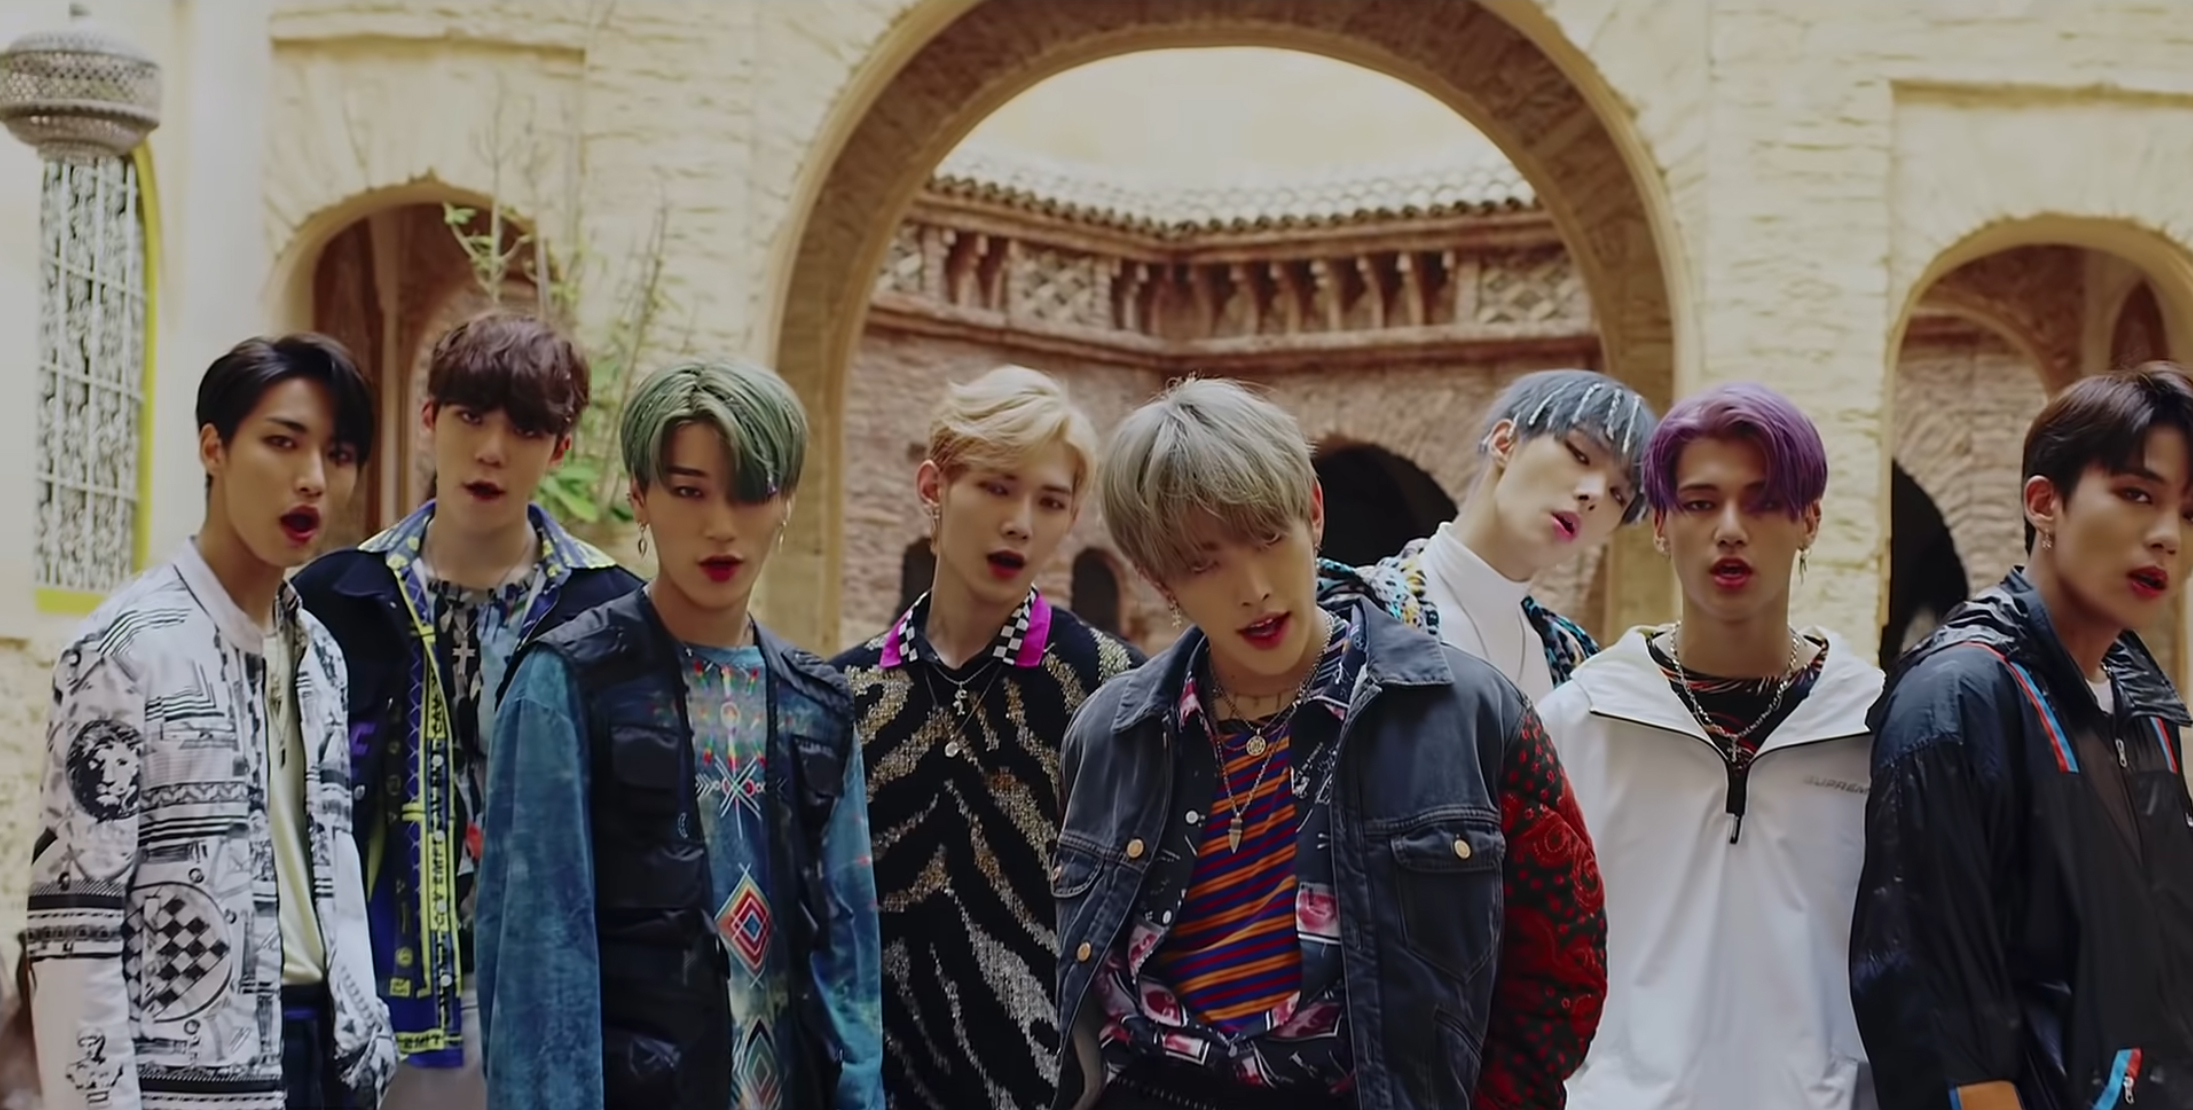 When Did Ateez Debut?